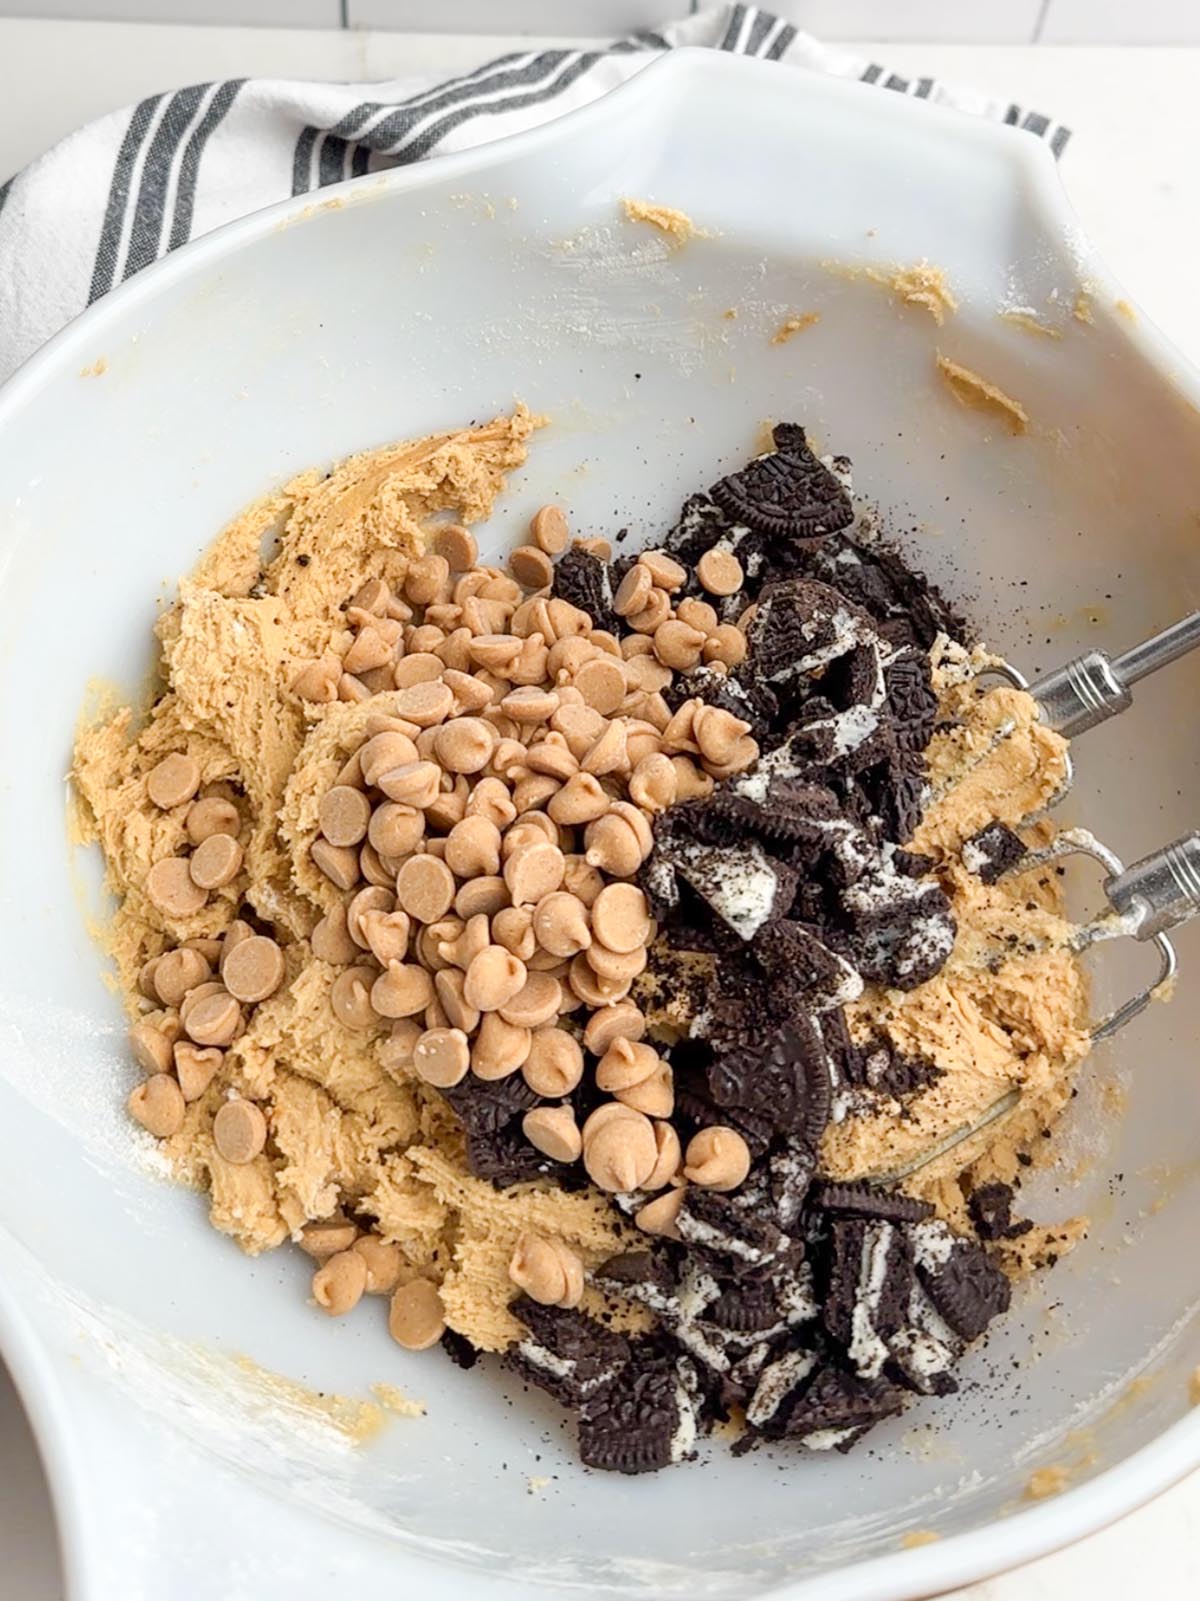 Peanut butter Oreo cookie dough in white mixing bowl.